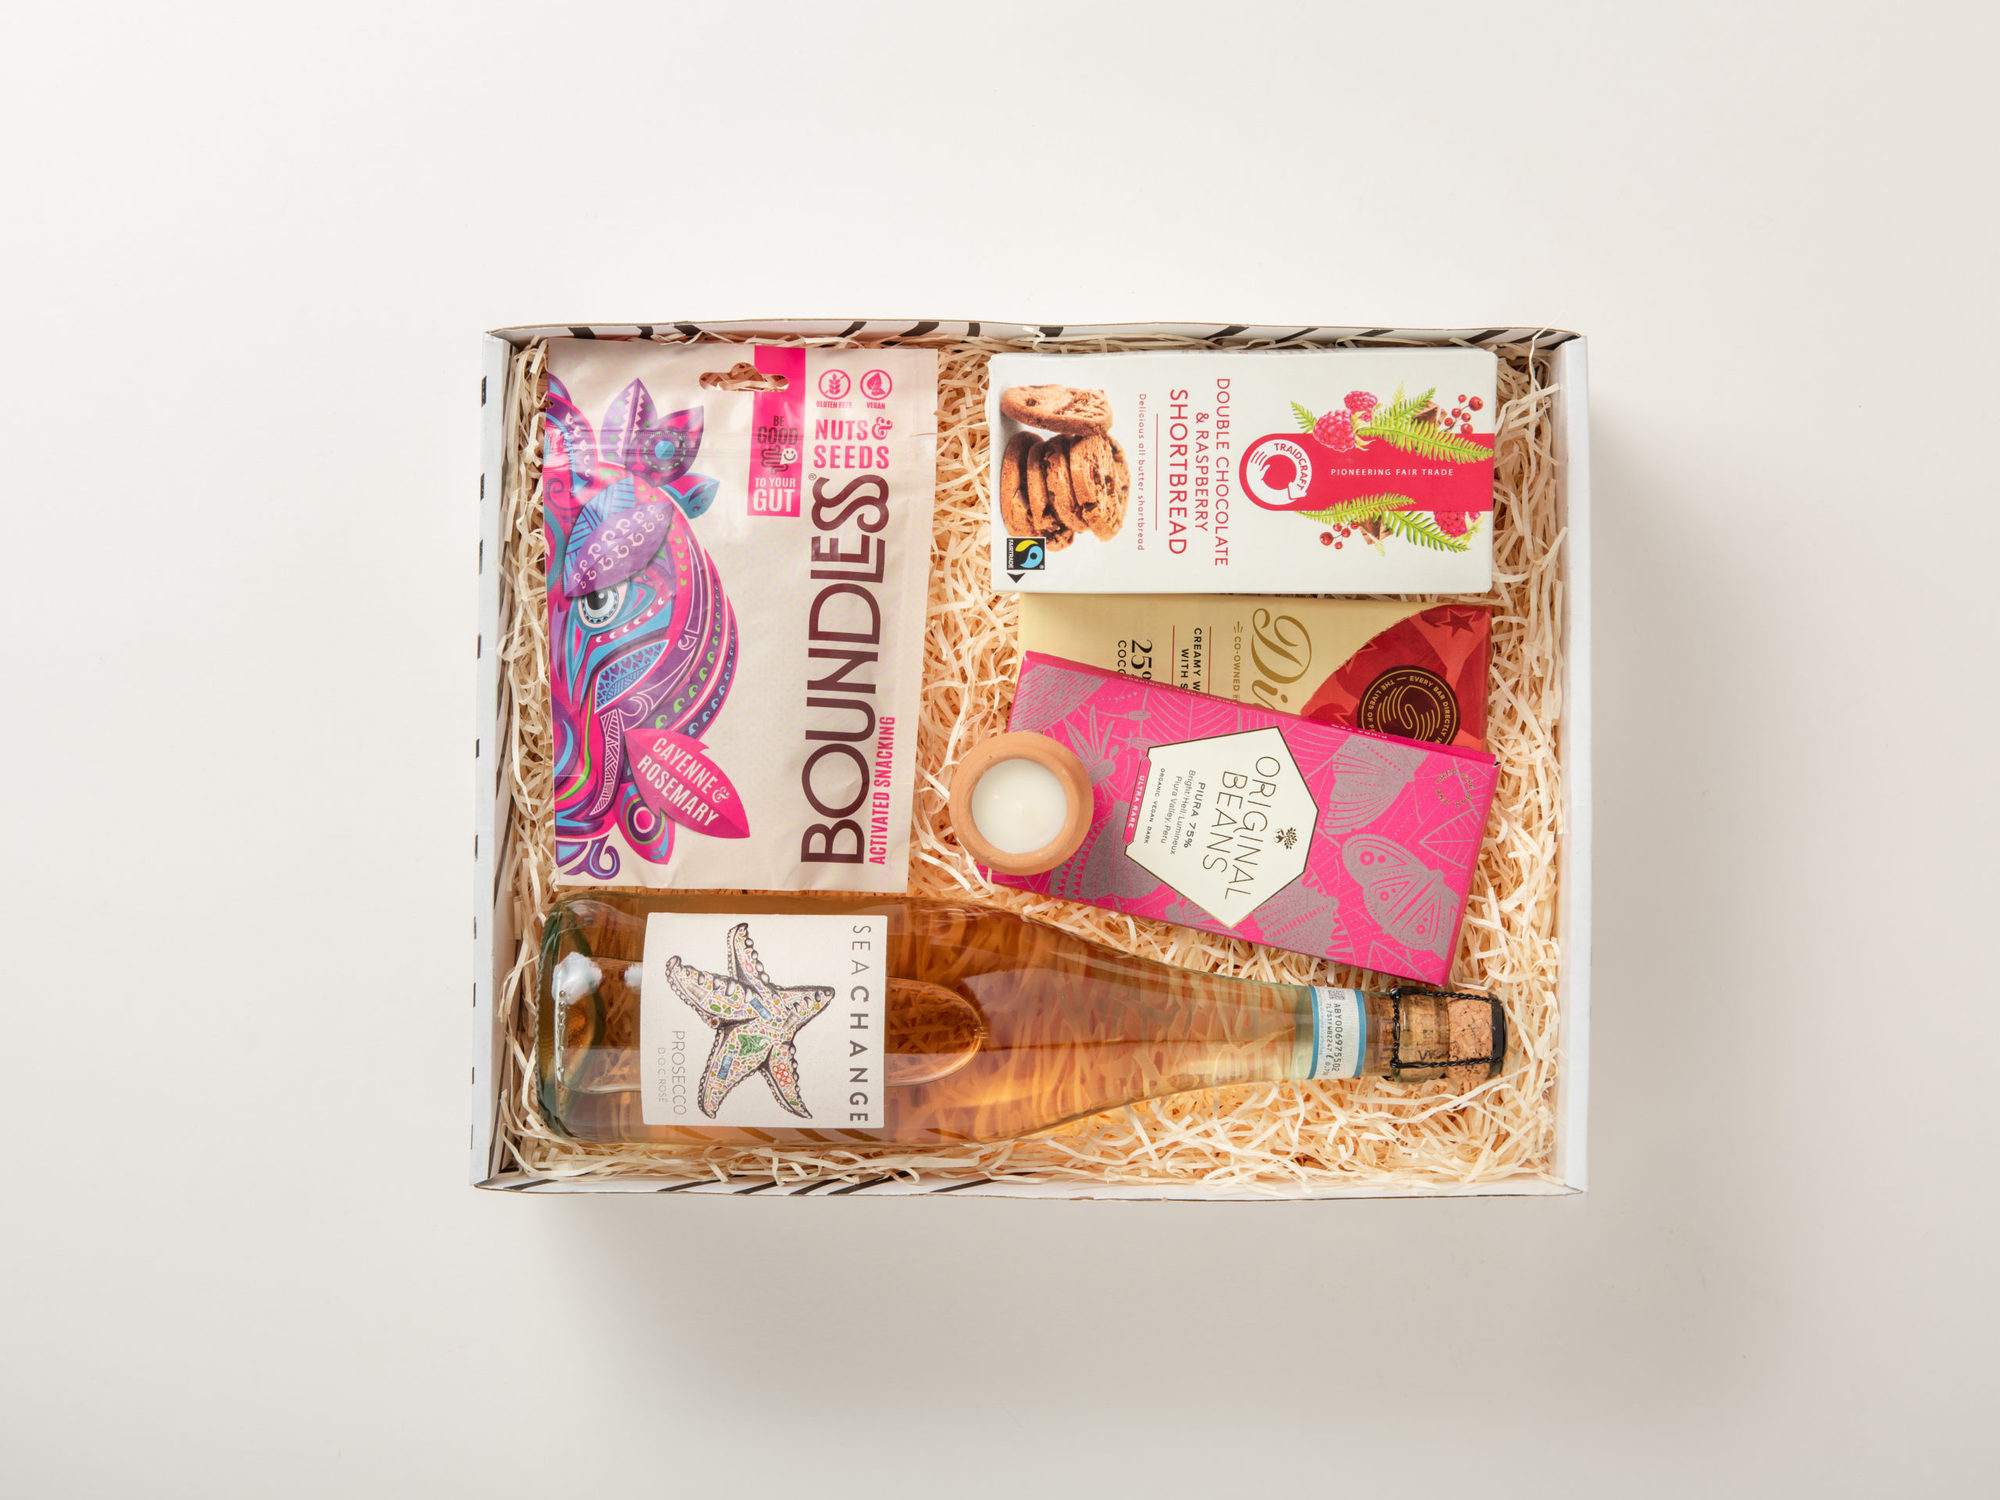 The Pretty in Pink Valentine's Day Gift Box as if shot from a bird's eye view.